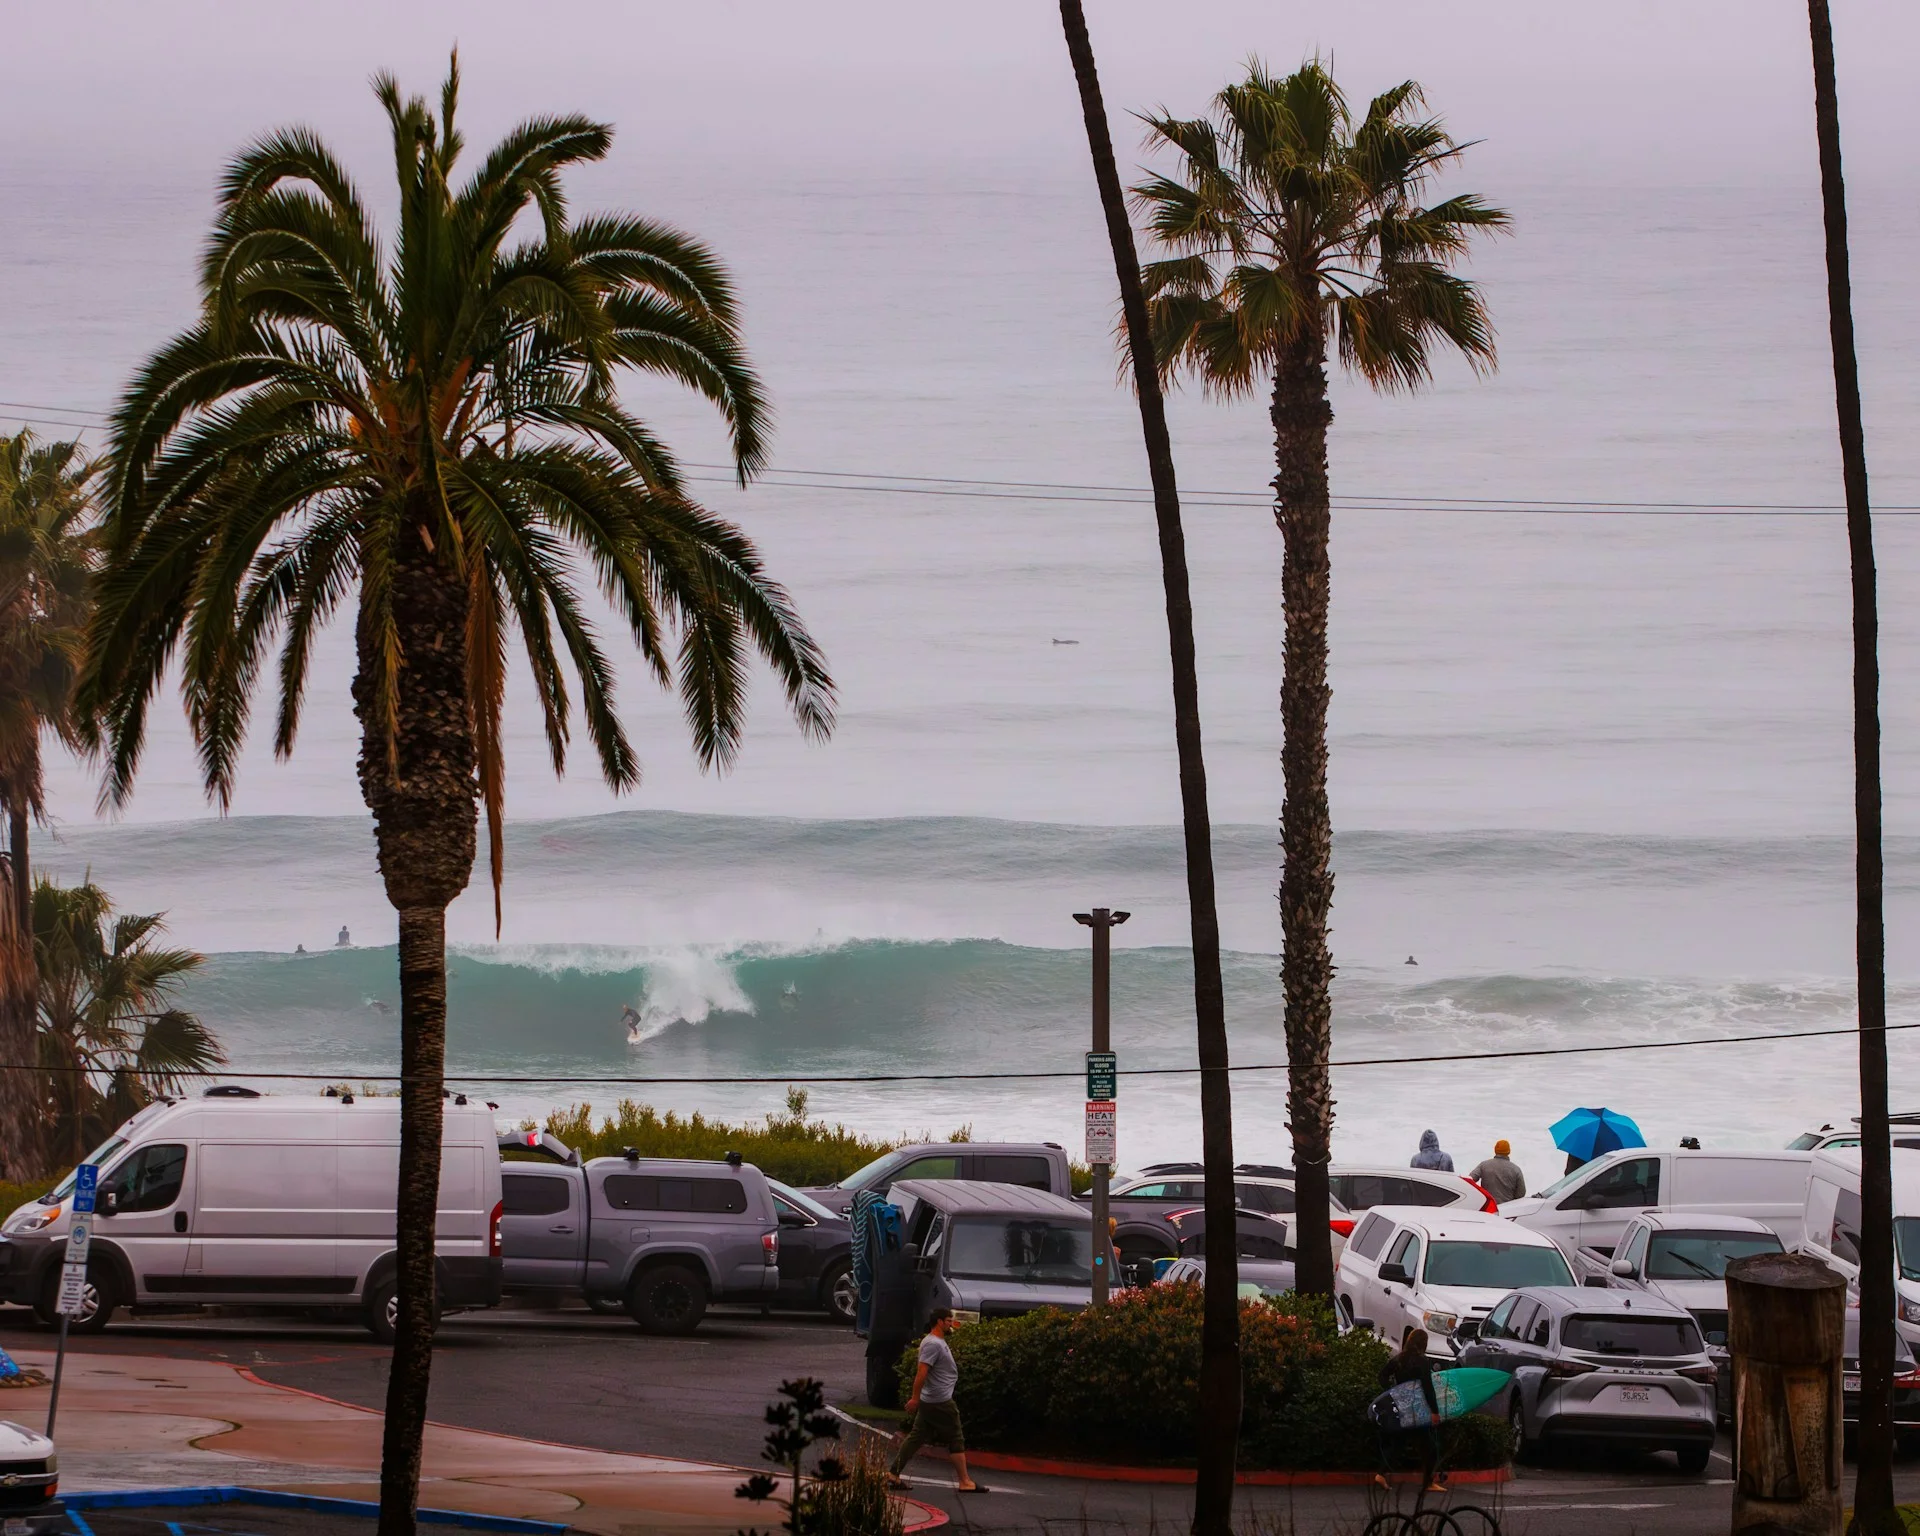 photo - a hawaii surfing beach scenery with vans of professional surfers from hawaii, palm trees and big rolling waves